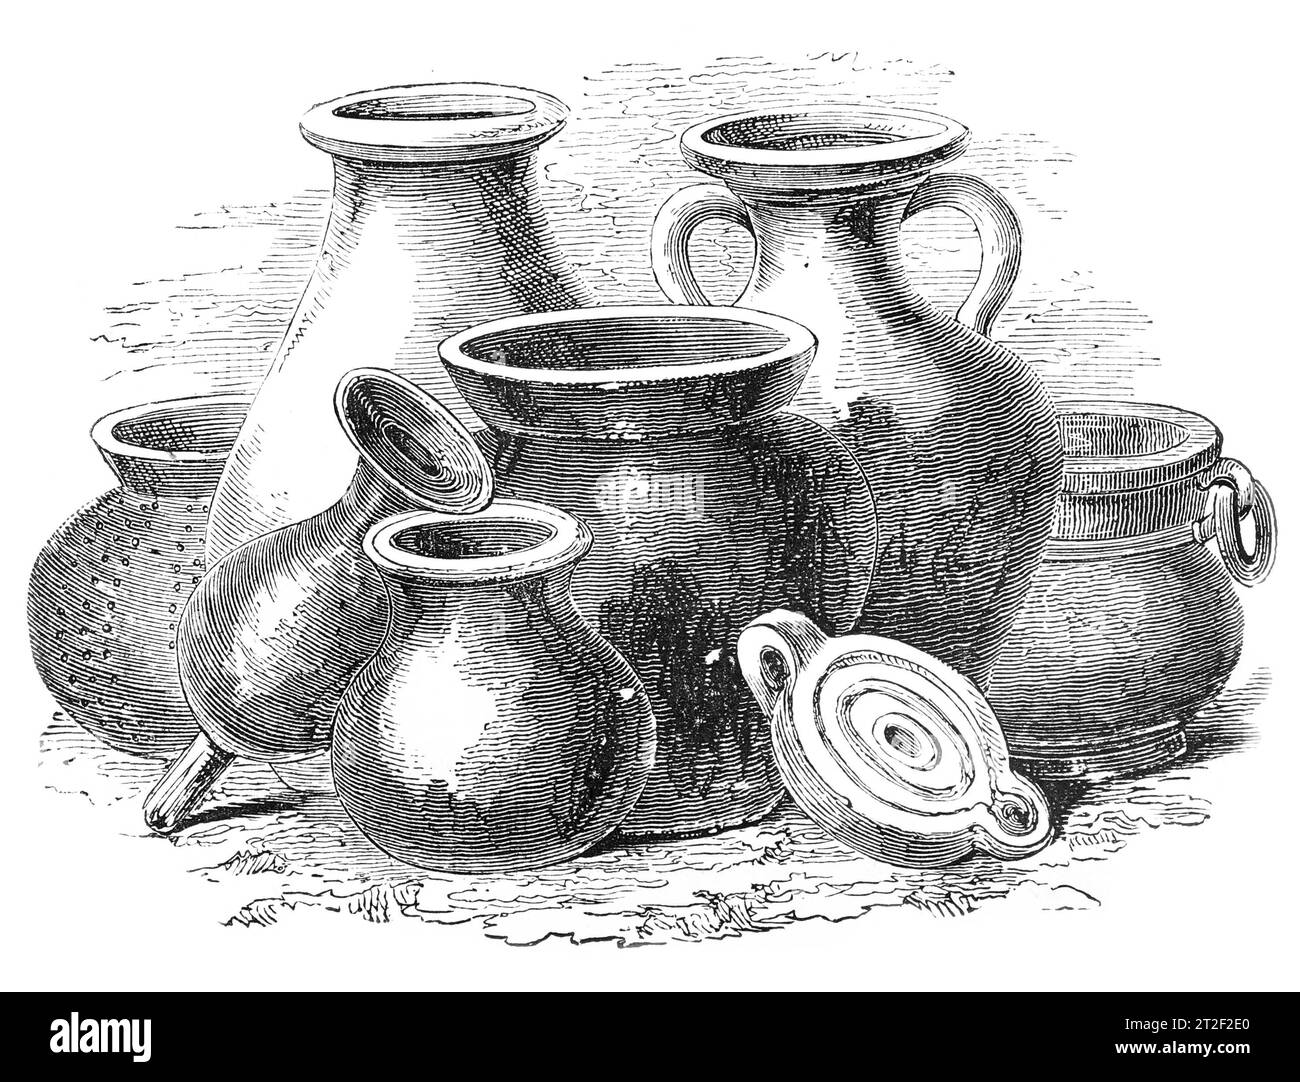 Vases and Lamps Found After the Great Fire of London; Black and White Illustration from the 'Old England' pubblicato da James Sangster nel 1860. Foto Stock